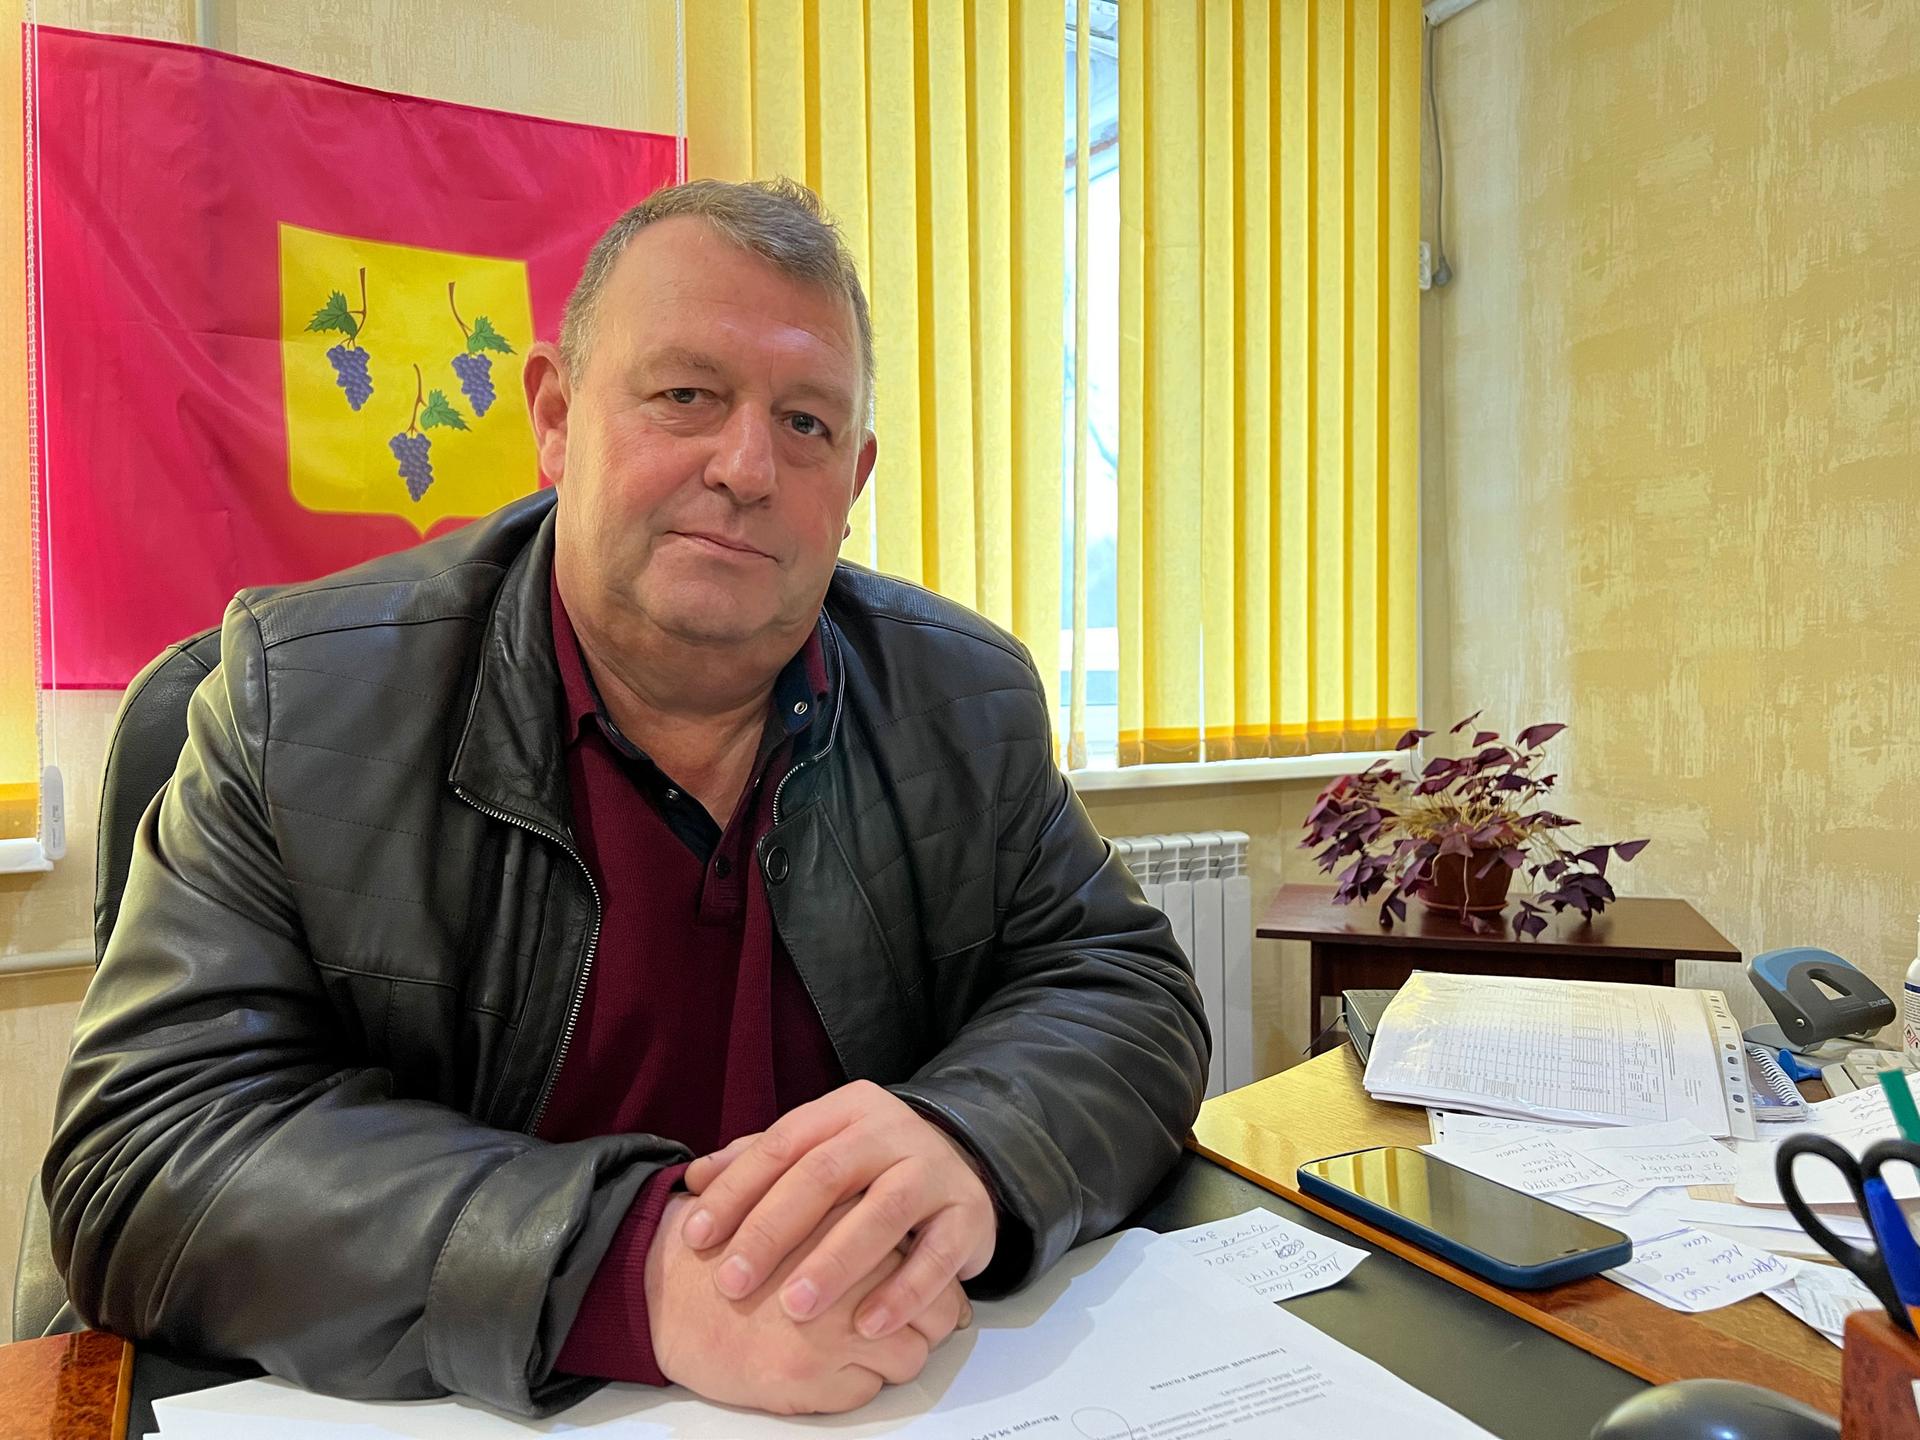 Fifty-two-year-old Valeriy Marchenko, mayor of Izium, said it will likely take years for the city to return to normal.